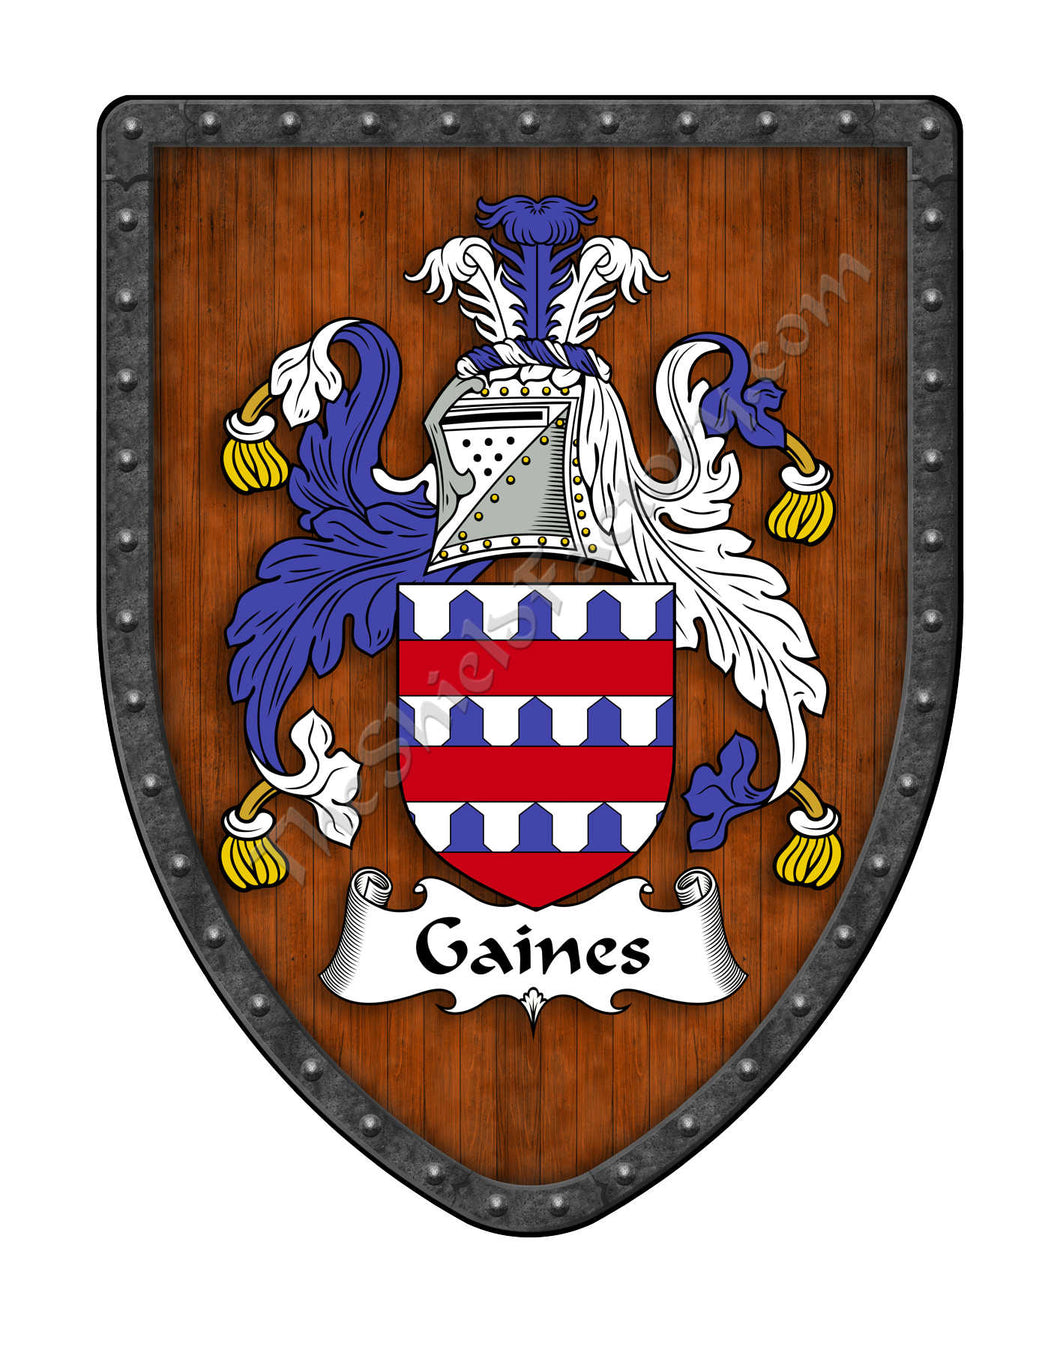 Gaines Coat of Arms Shield